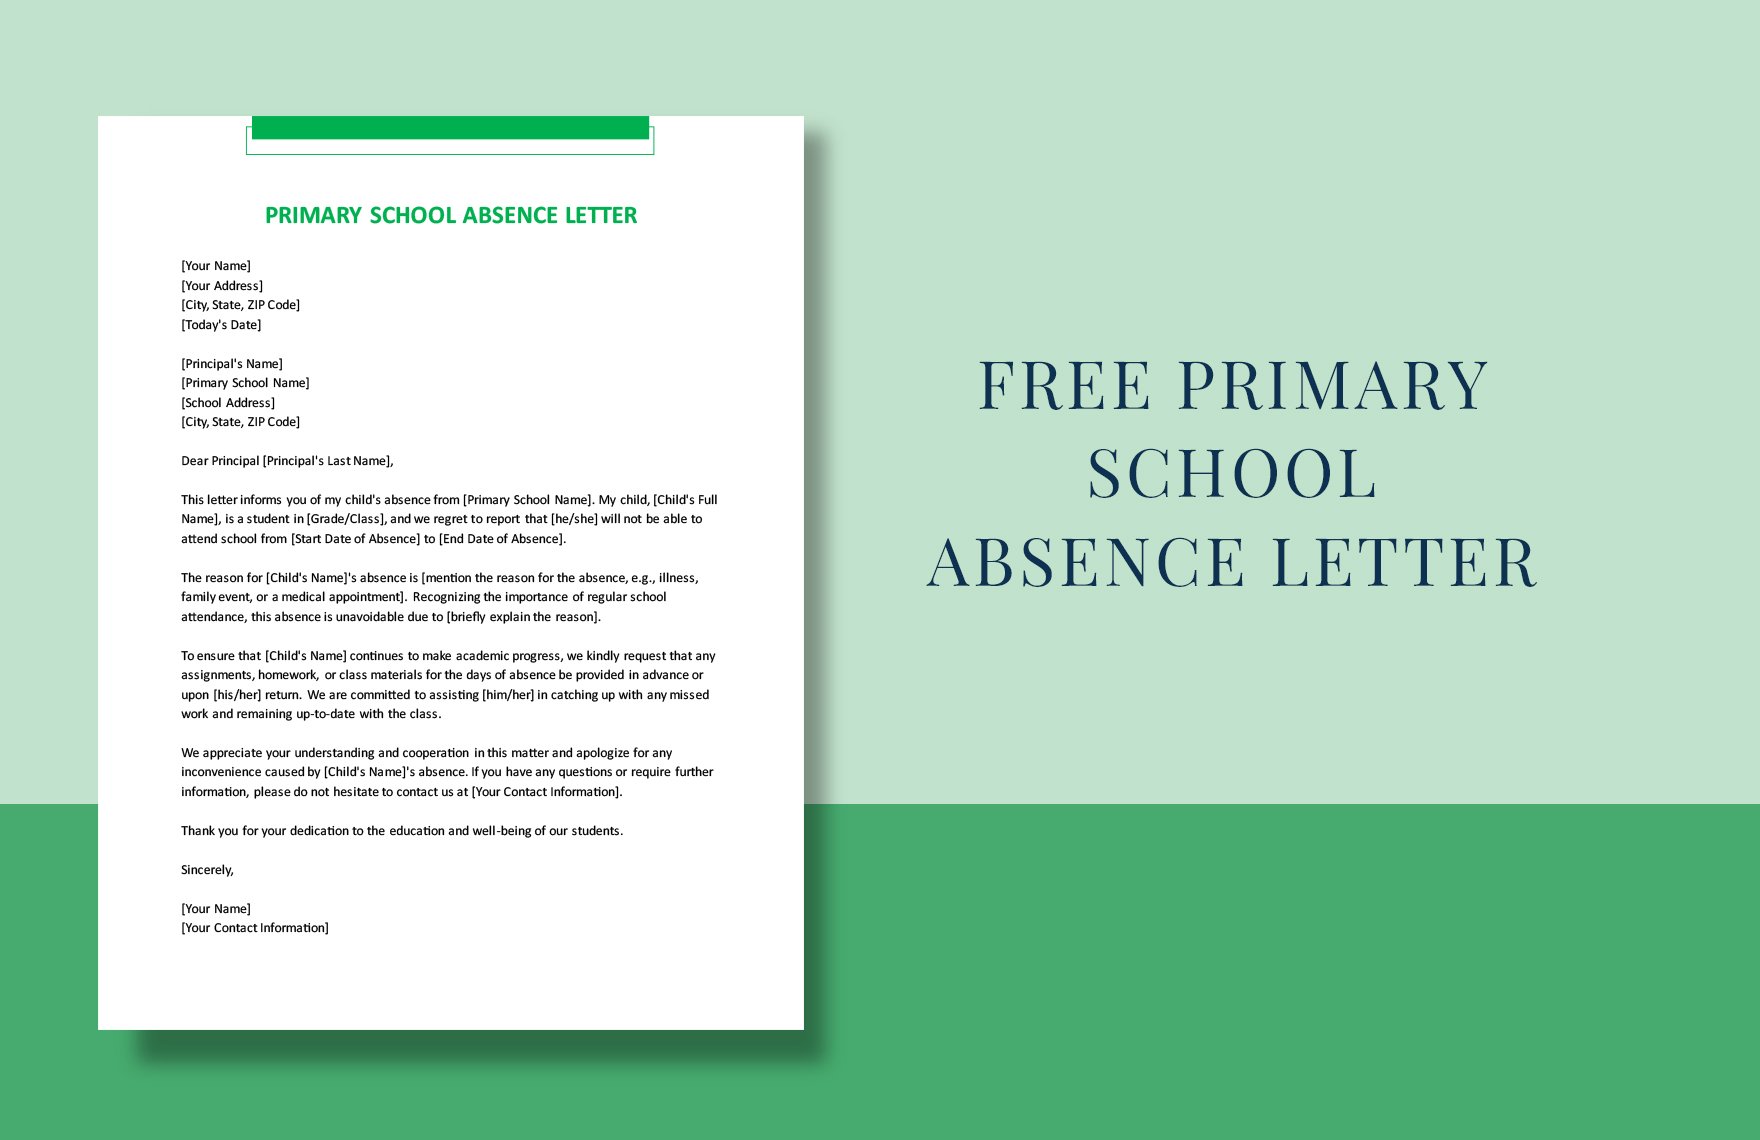 Primary School Absence Letter